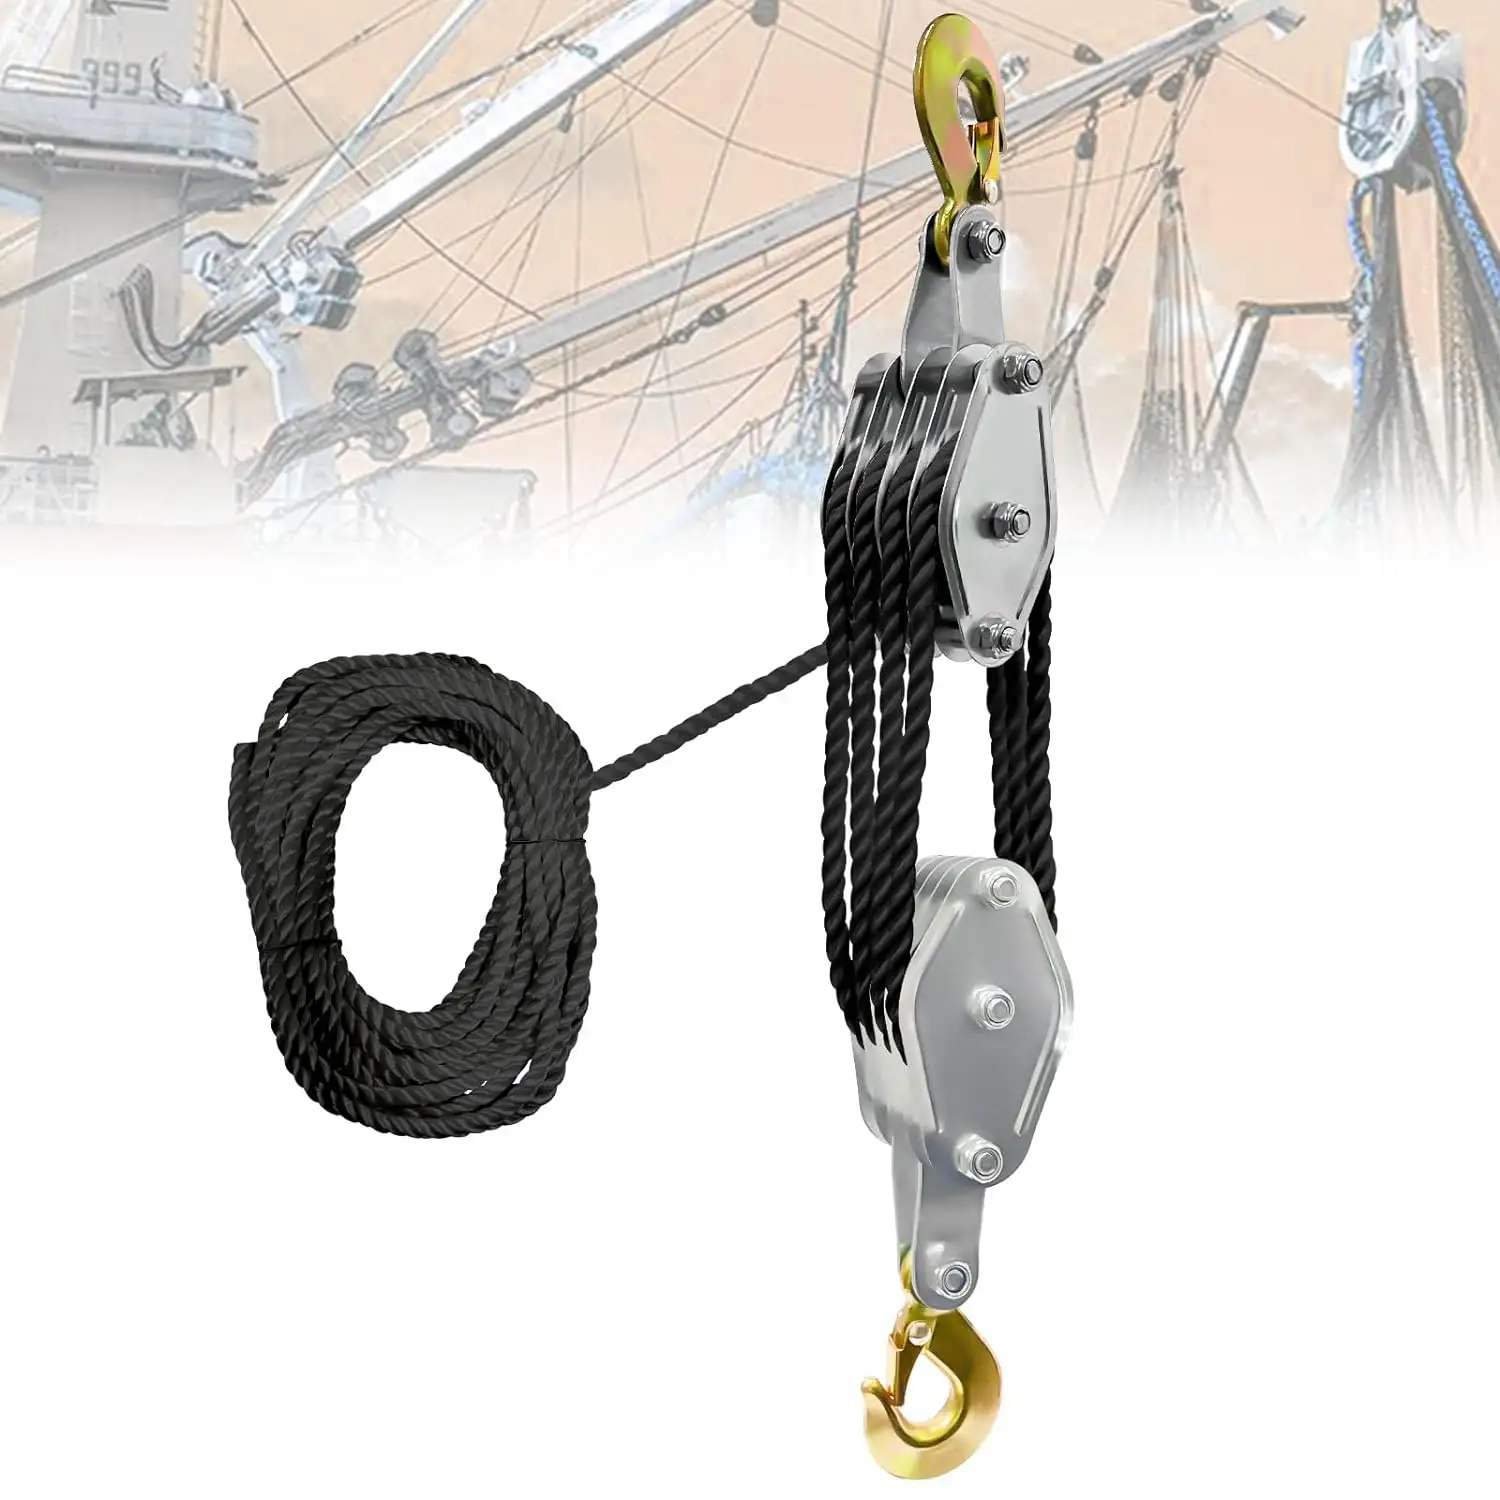 Rope Hoist Pulley System Heavy Duty Pulley Block for Hunting Lifting Heavy Objects Garage Warehouses Building